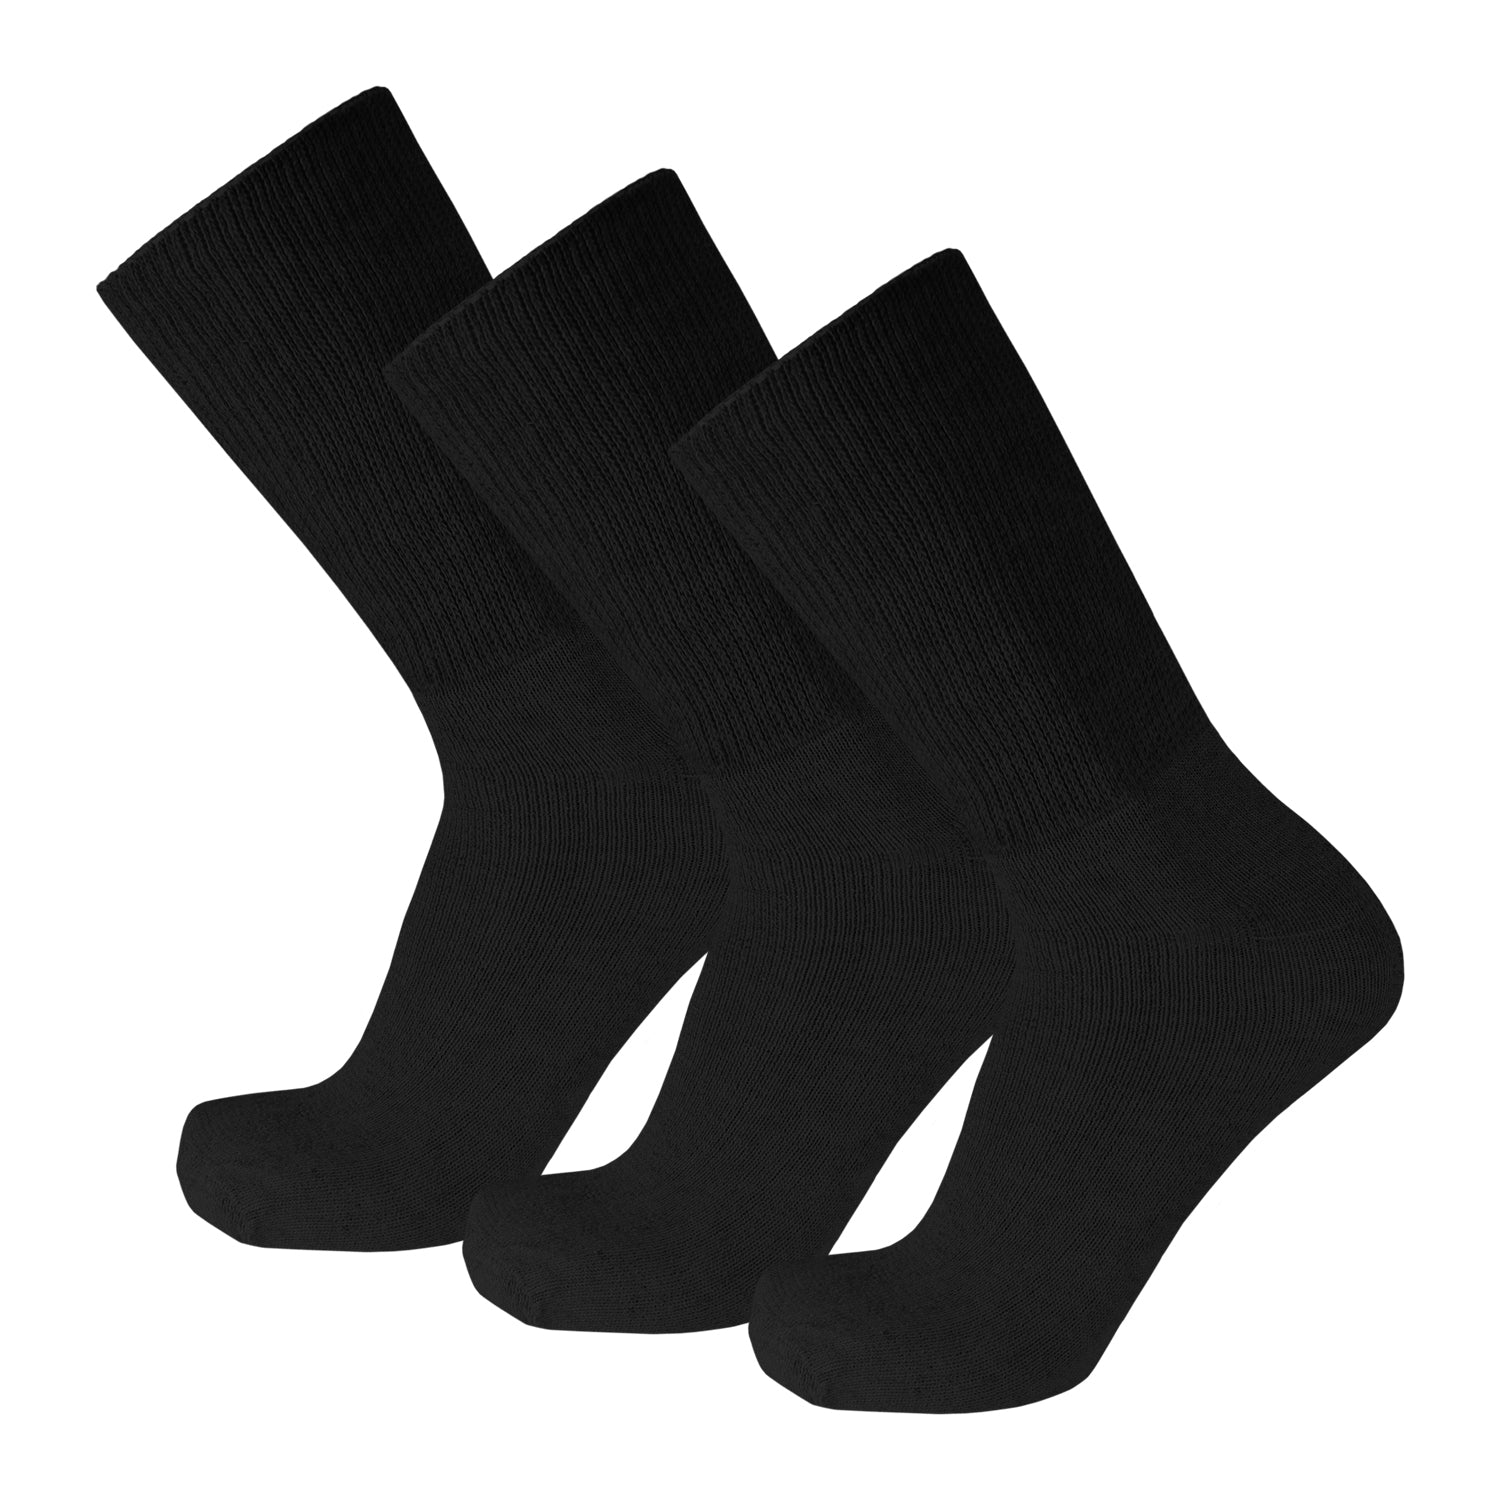 Black Crew Socks Cotton Soft With Wide Nonbinding Top 3 Pairs